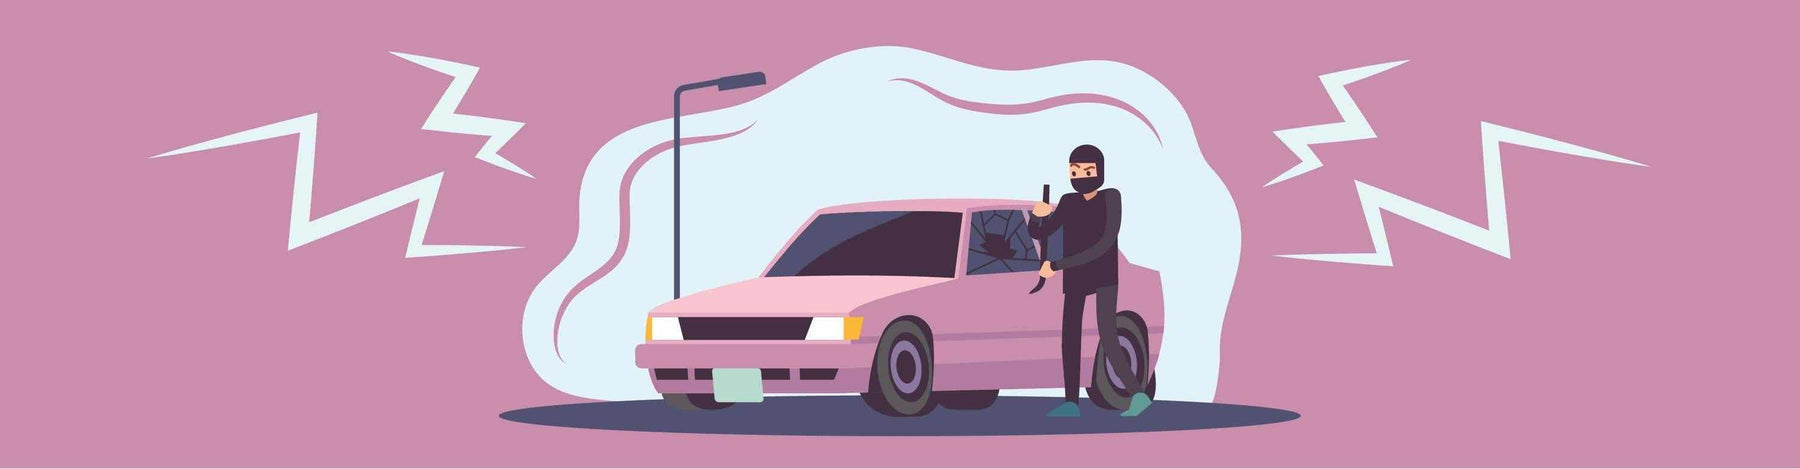 Top Auto Crime Prevention Tips to Reduce Your Risks and Loss -  - BlackboxMyCar Canada